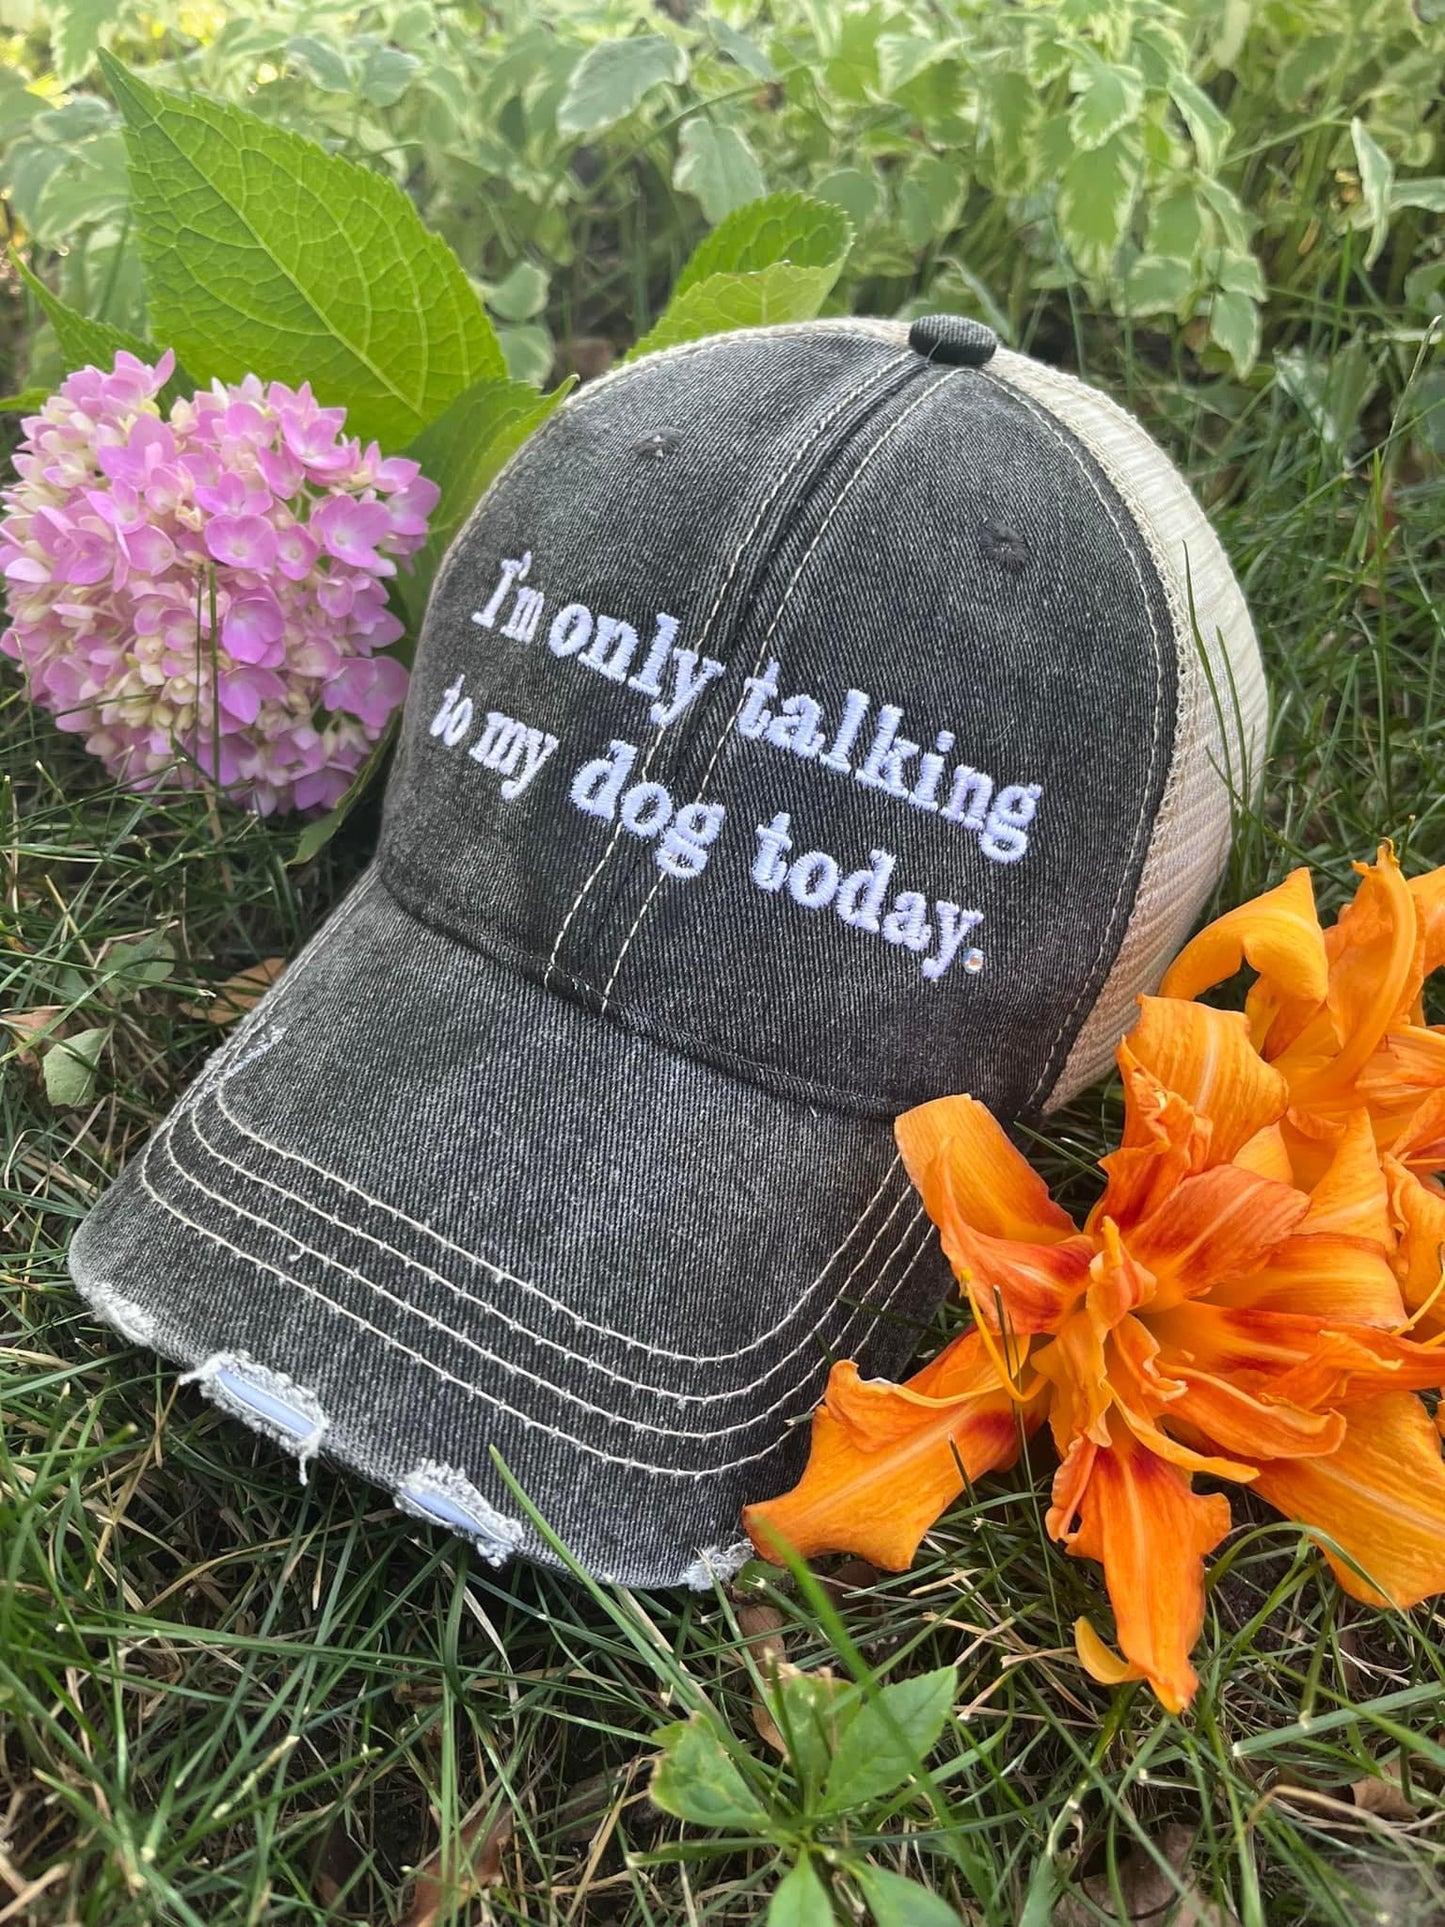 Dog and cat mom hats Embroidered womens trucker caps